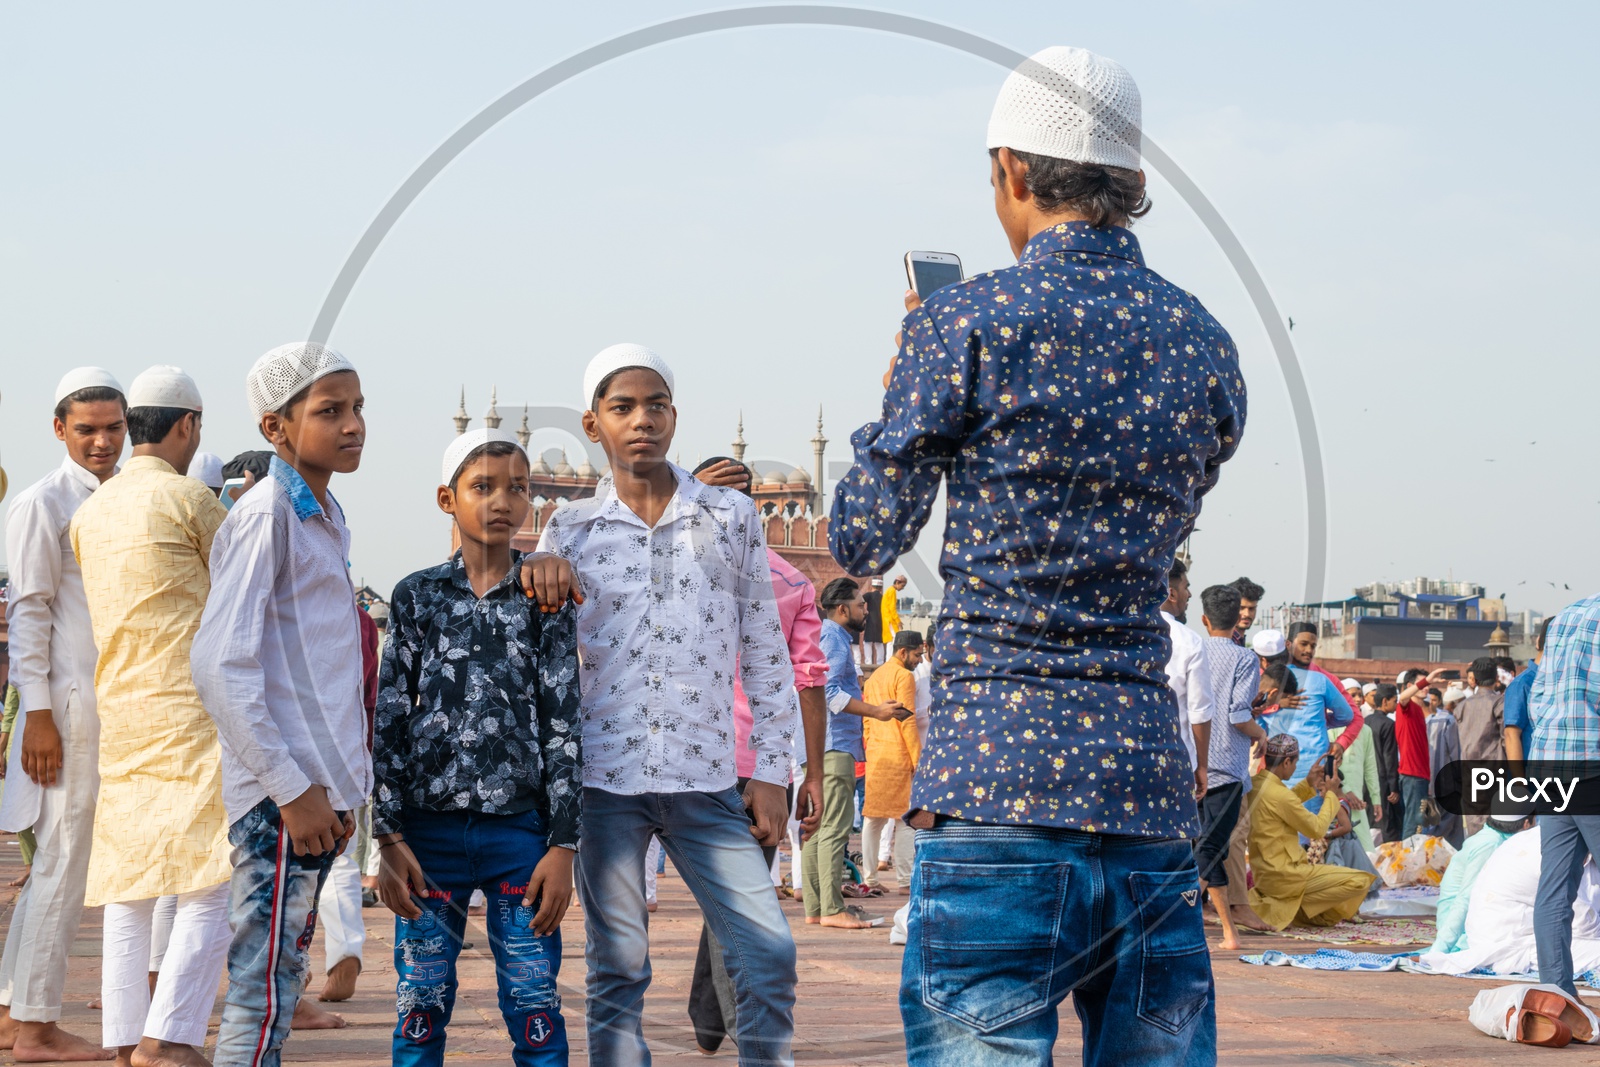 Clicking photos after the Namaz on the day of Eid-ul-Fitr (End of the holy month of Ramadan) at Jama Masjid, Delhi